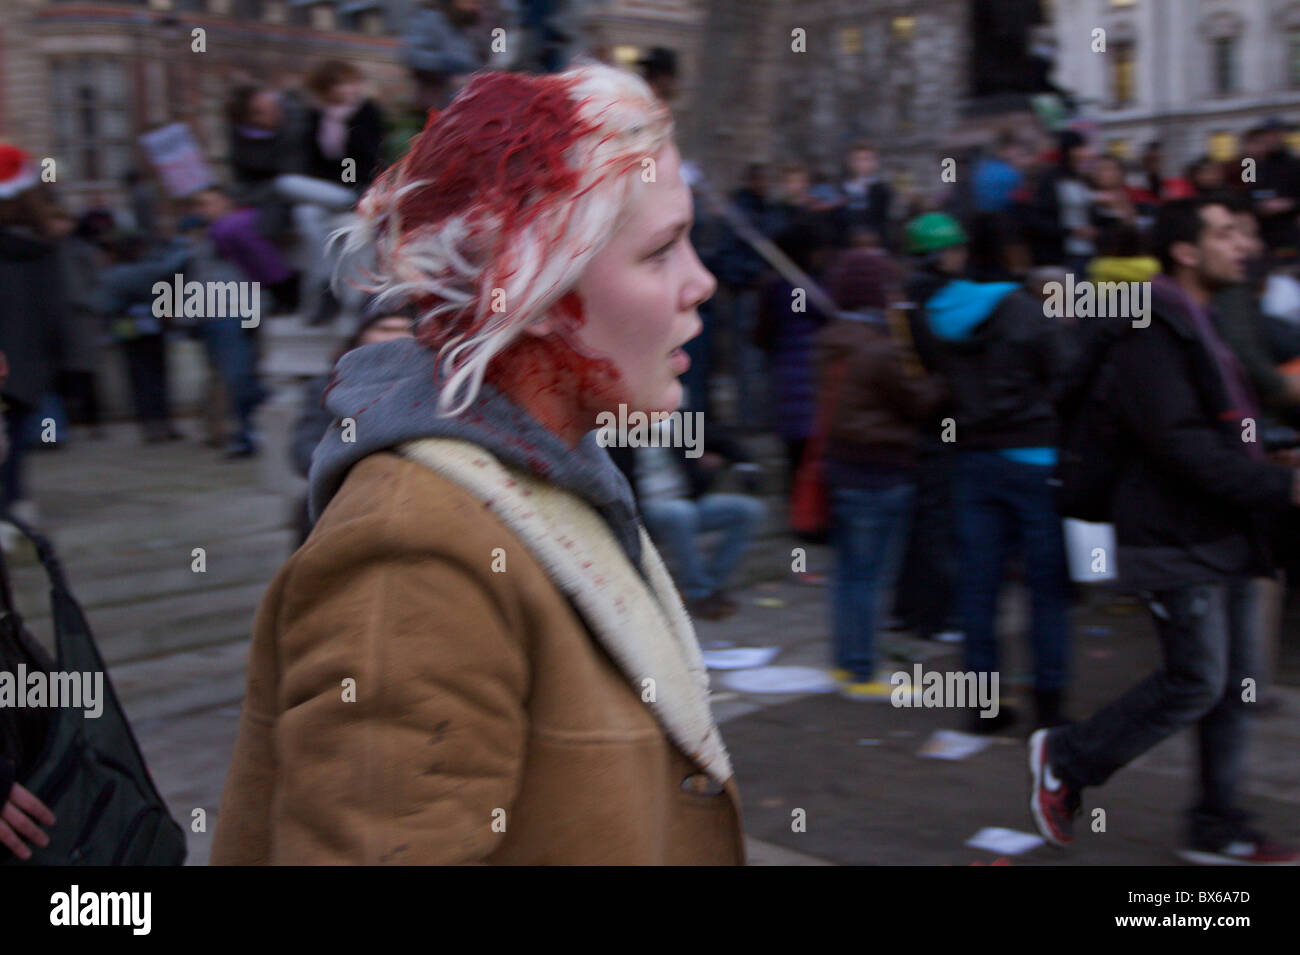 A young girls head bleeds during violent student protests against rise to tuition fees in Parliament Square, central London. Stock Photo